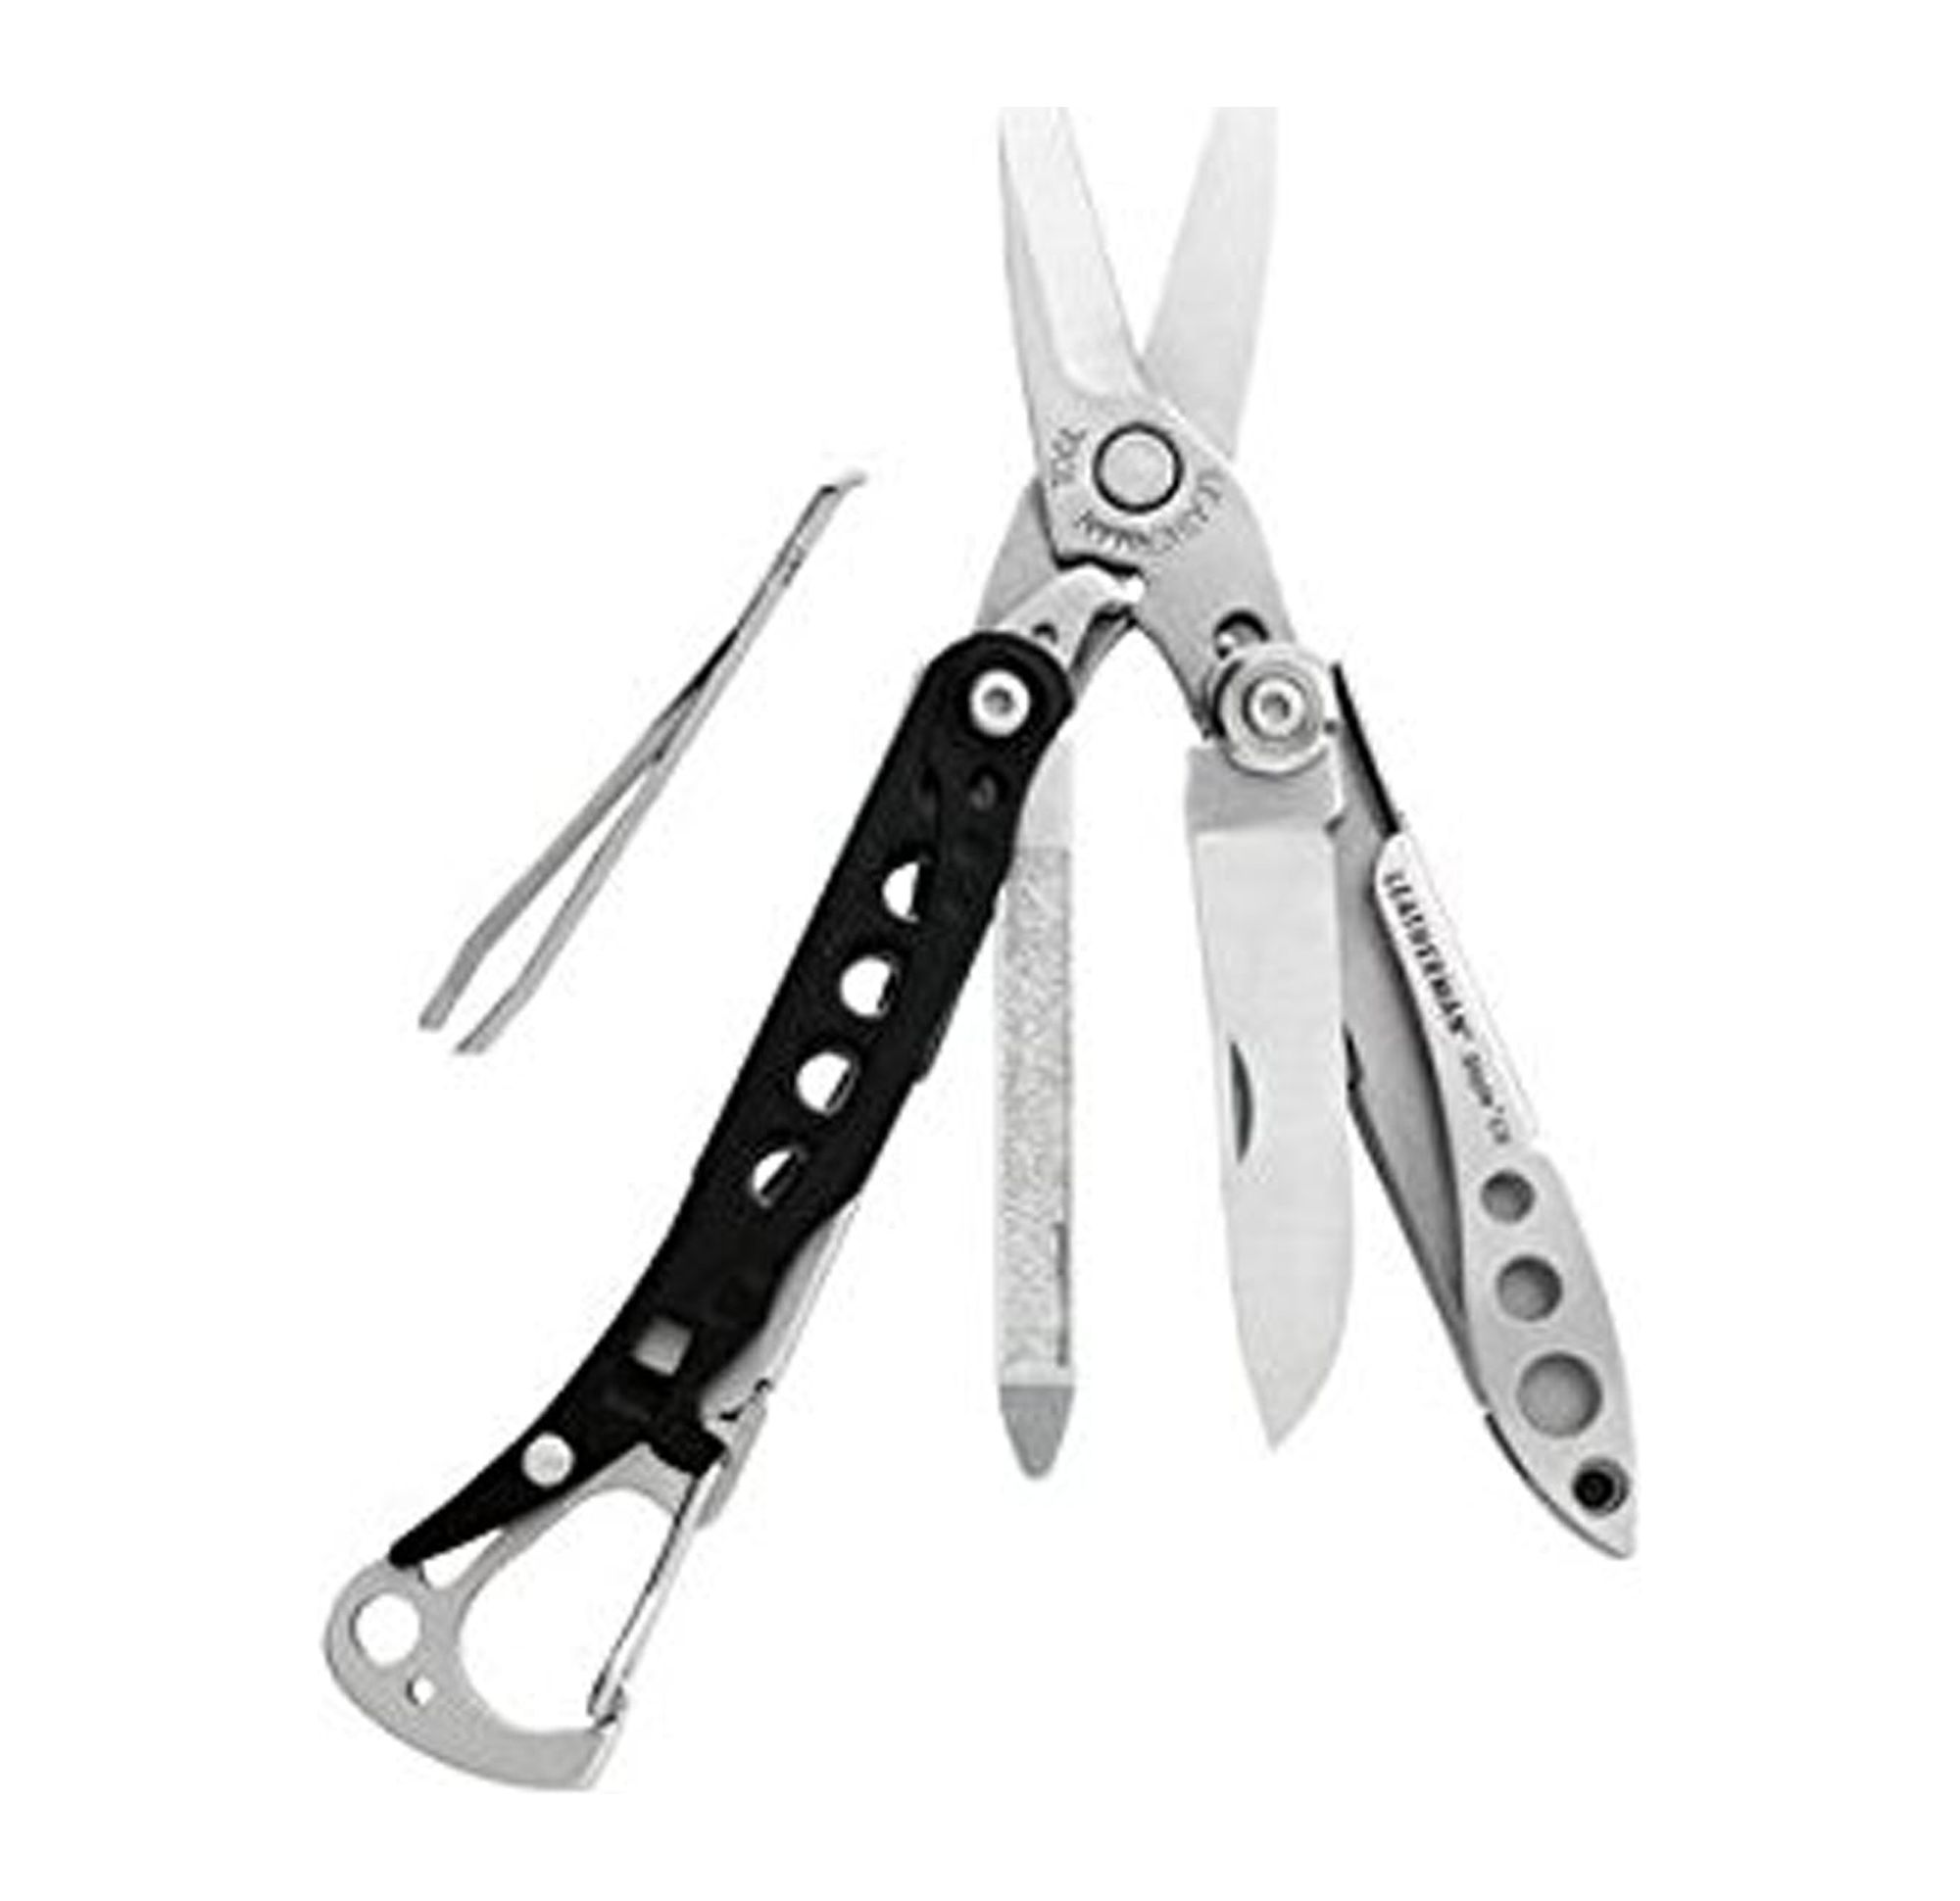 Leatherman, Style CS Keychain Multitool with Spring-Action Scissors and Grooming Tools, Stainless Steel - image 1 of 7